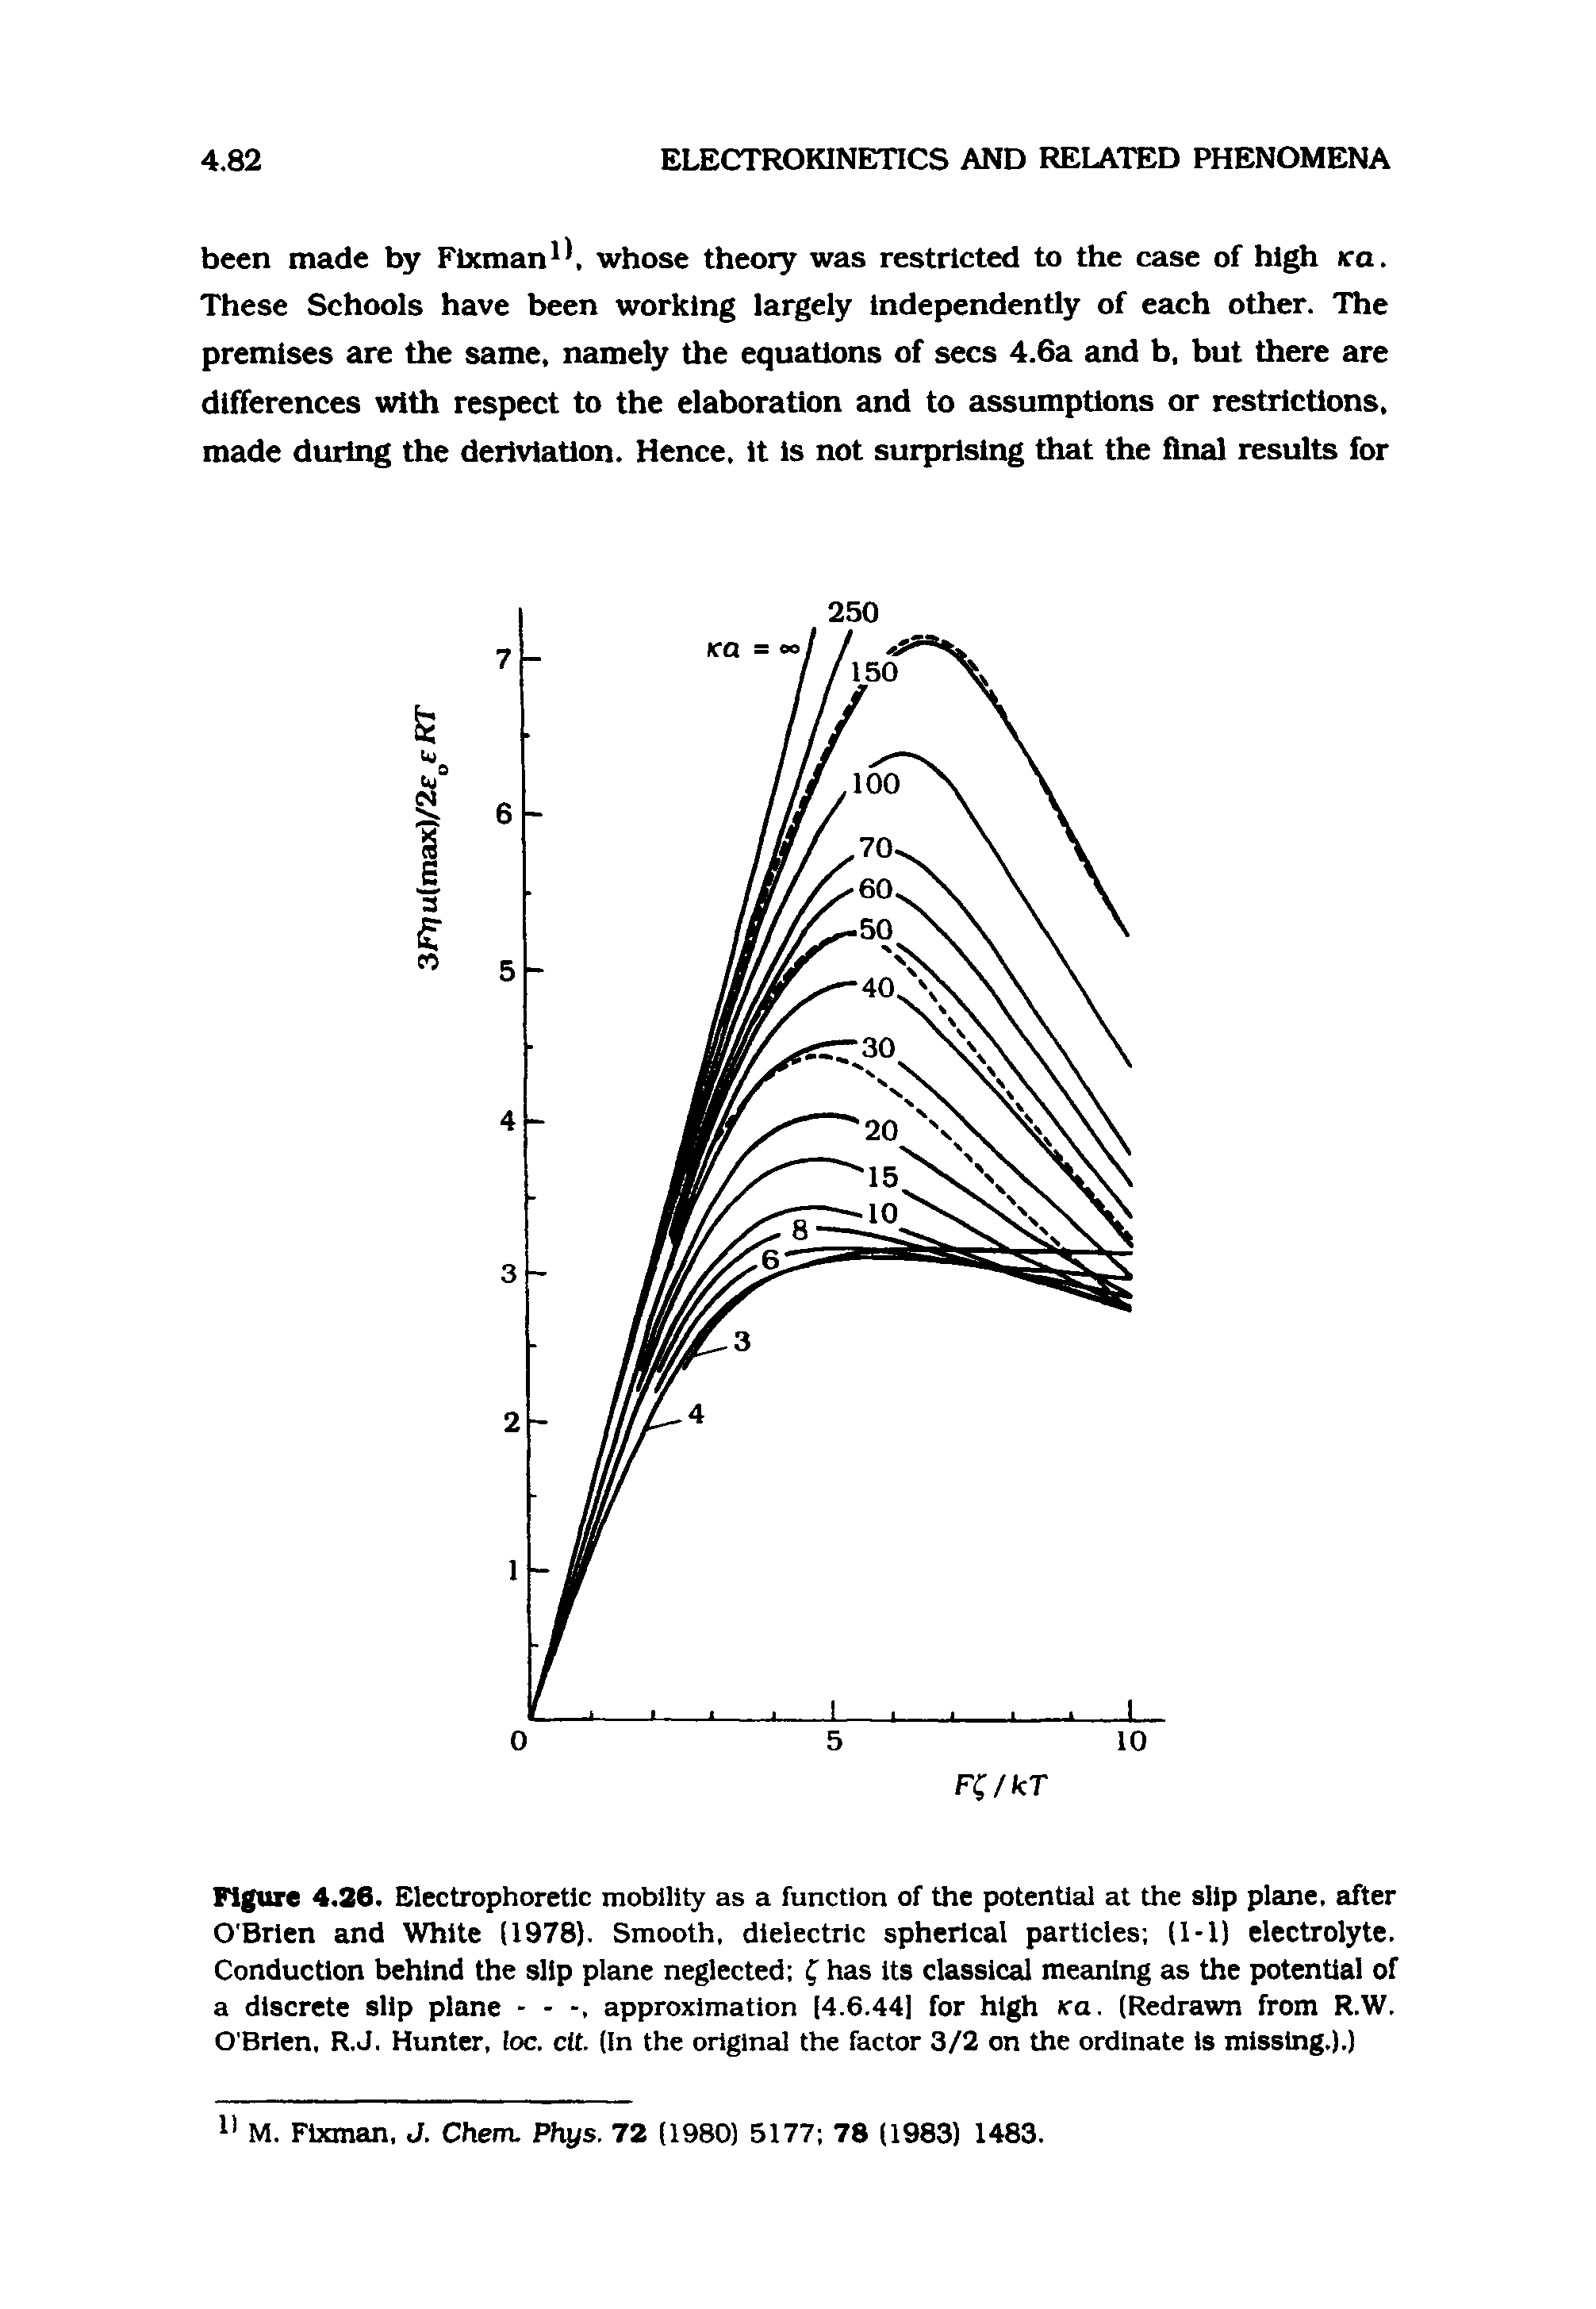 Figure 4.26. Electrophoretic mobility as a function of the potential at the slip plane, after O Brien and White (1978). Smooth, dielectric spherical particles (1-1) electrolyte. Conduction behind the slip plane neglected has its classical meaning as the potential of a discrete slip plane - - approximation (4.6.44] for high Ka. (Redrawn from R.W. O Brien, R.J. Hunter, loc. cit. (In the original the factor 3/2 on the ordinate is missing.).)...